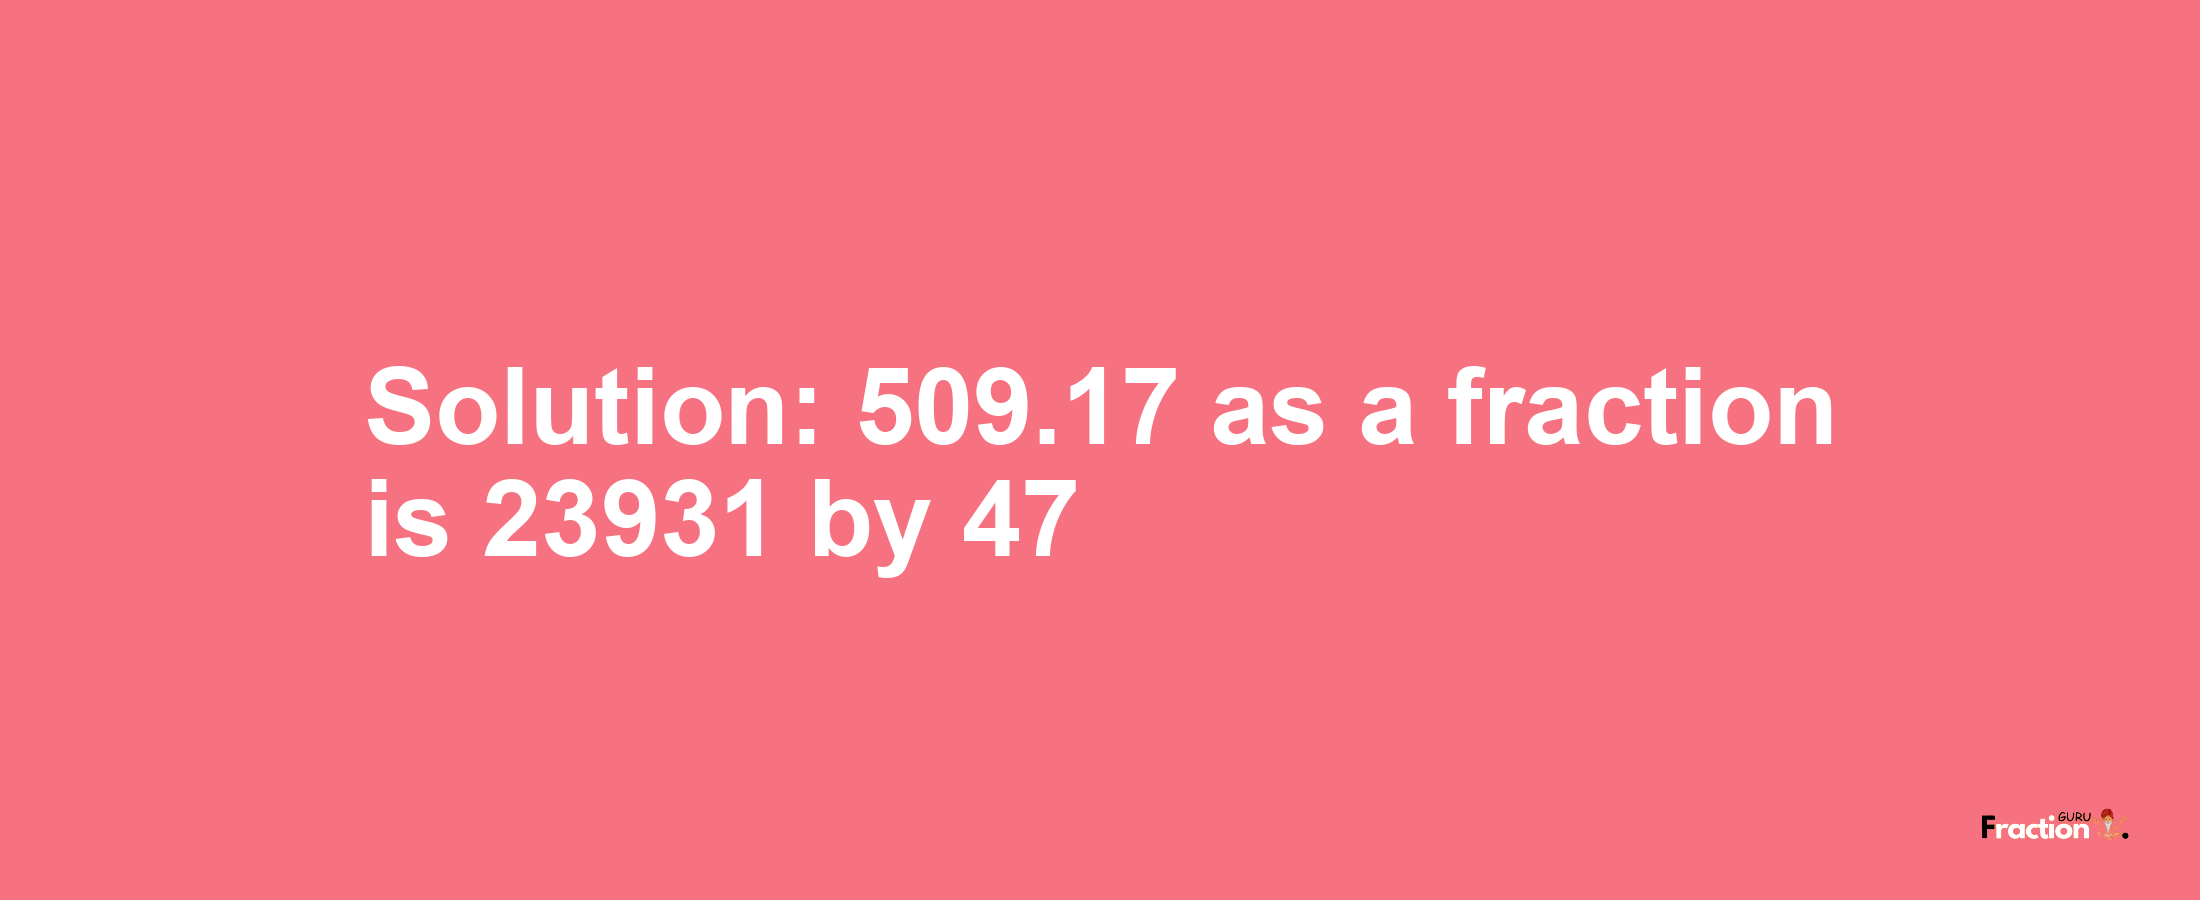 Solution:509.17 as a fraction is 23931/47